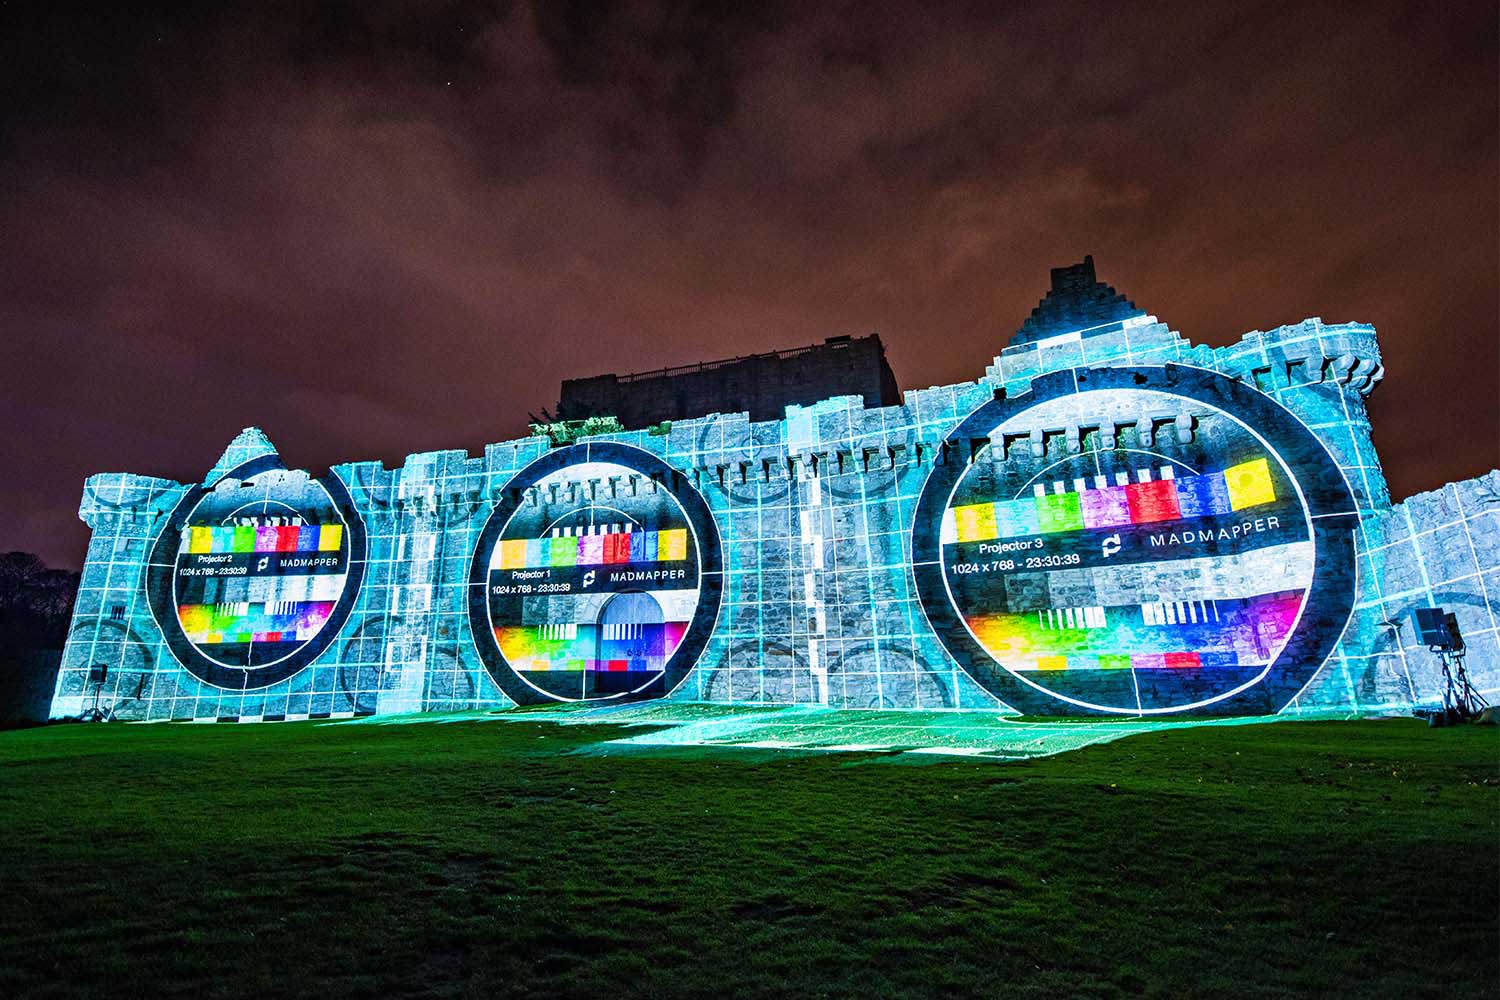 madmapper test card projection mapping onto Craigmillar Castle